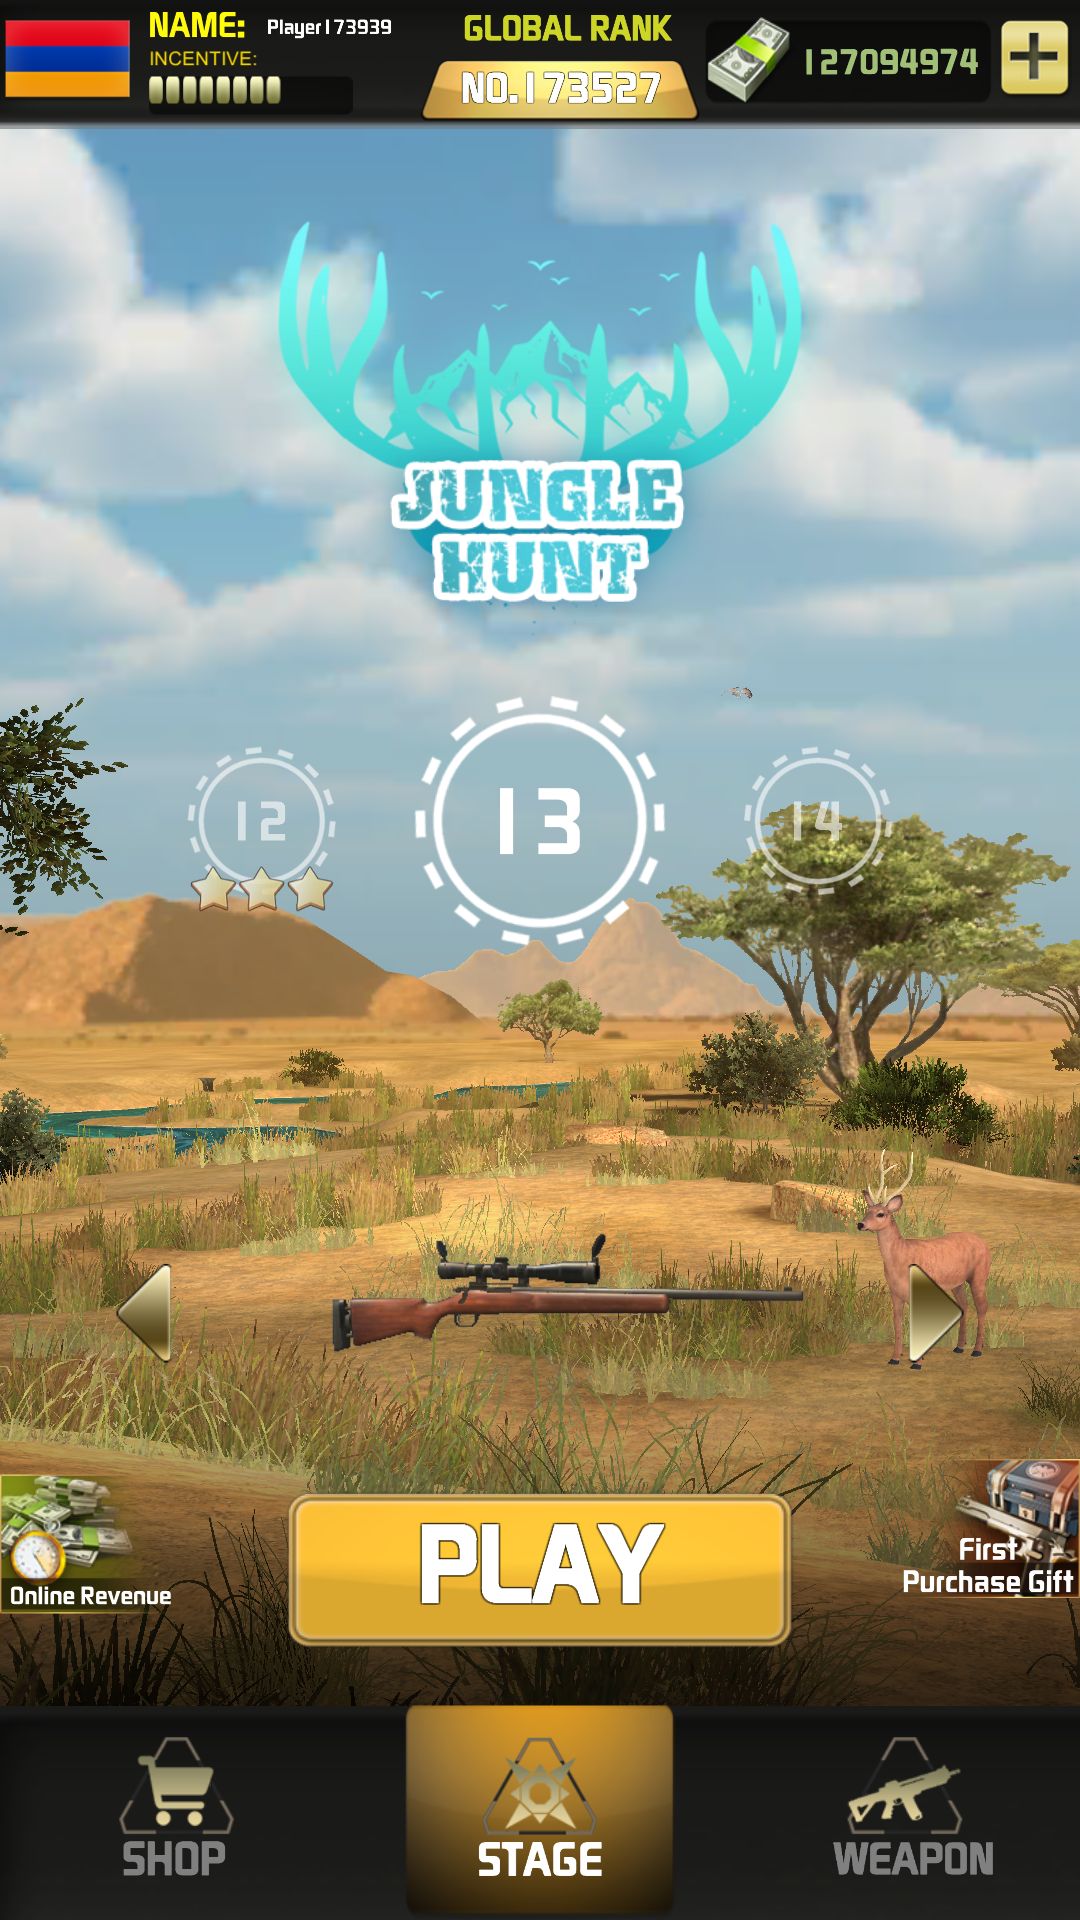 Download The Hunting World - 3D Wild Shooting Game für Android kostenlos.